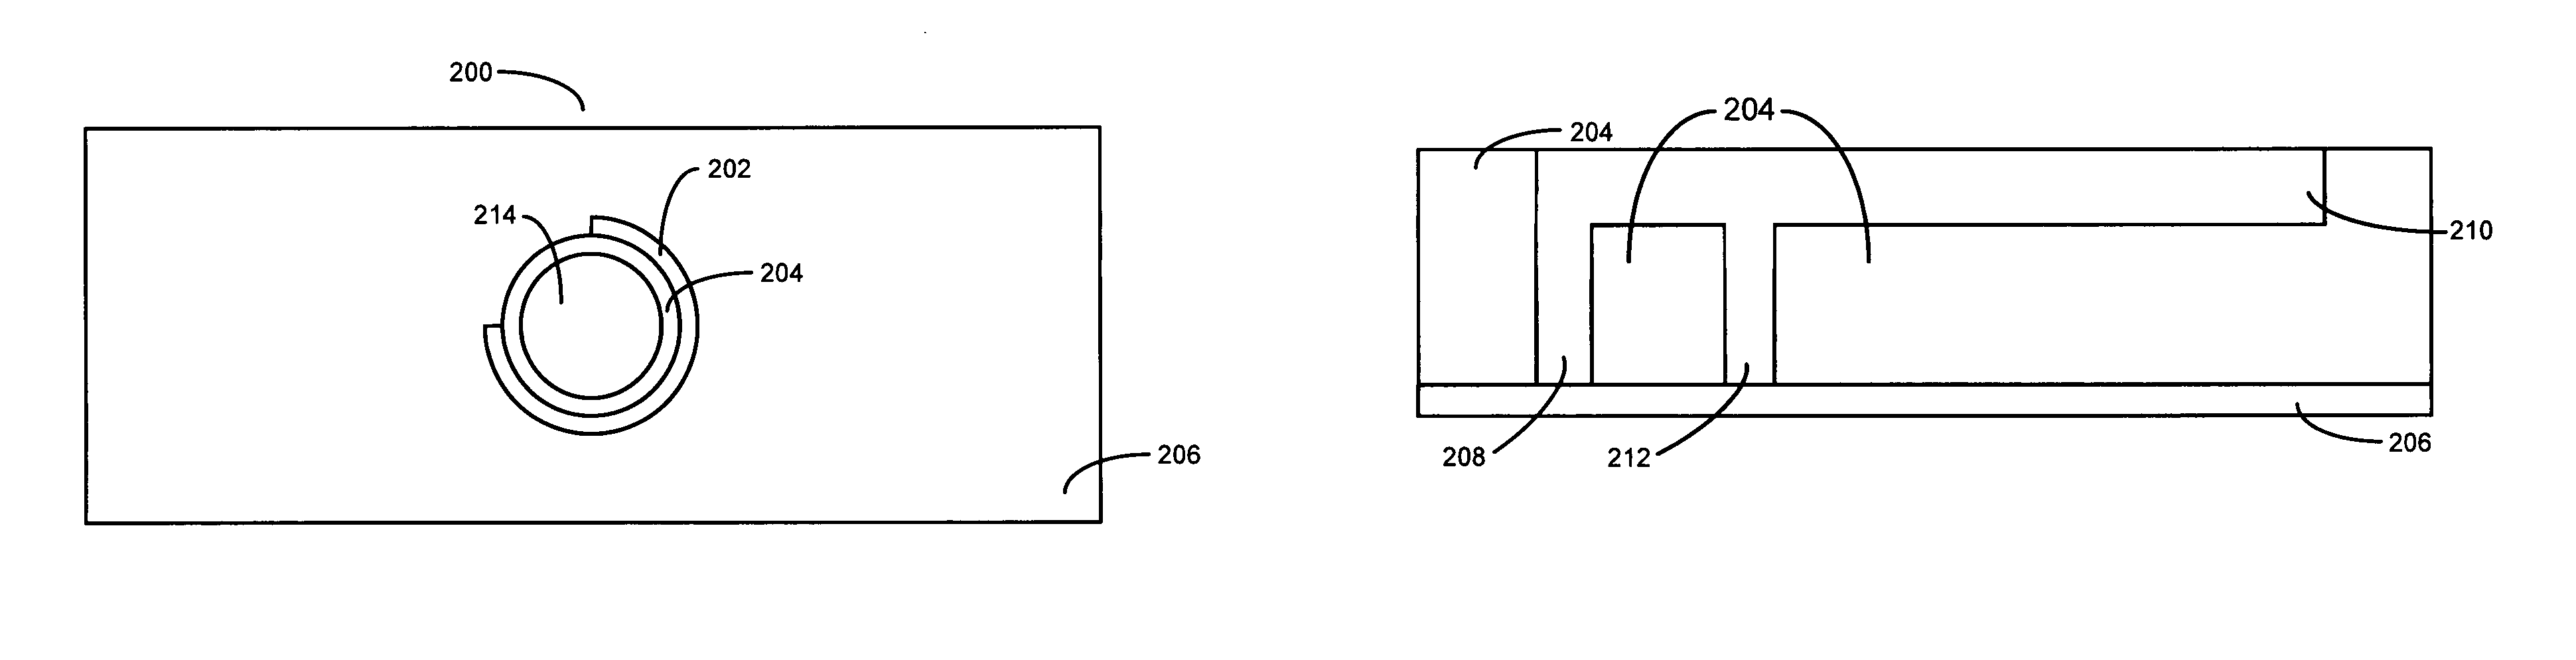 Combined battery holder and antenna apparatus